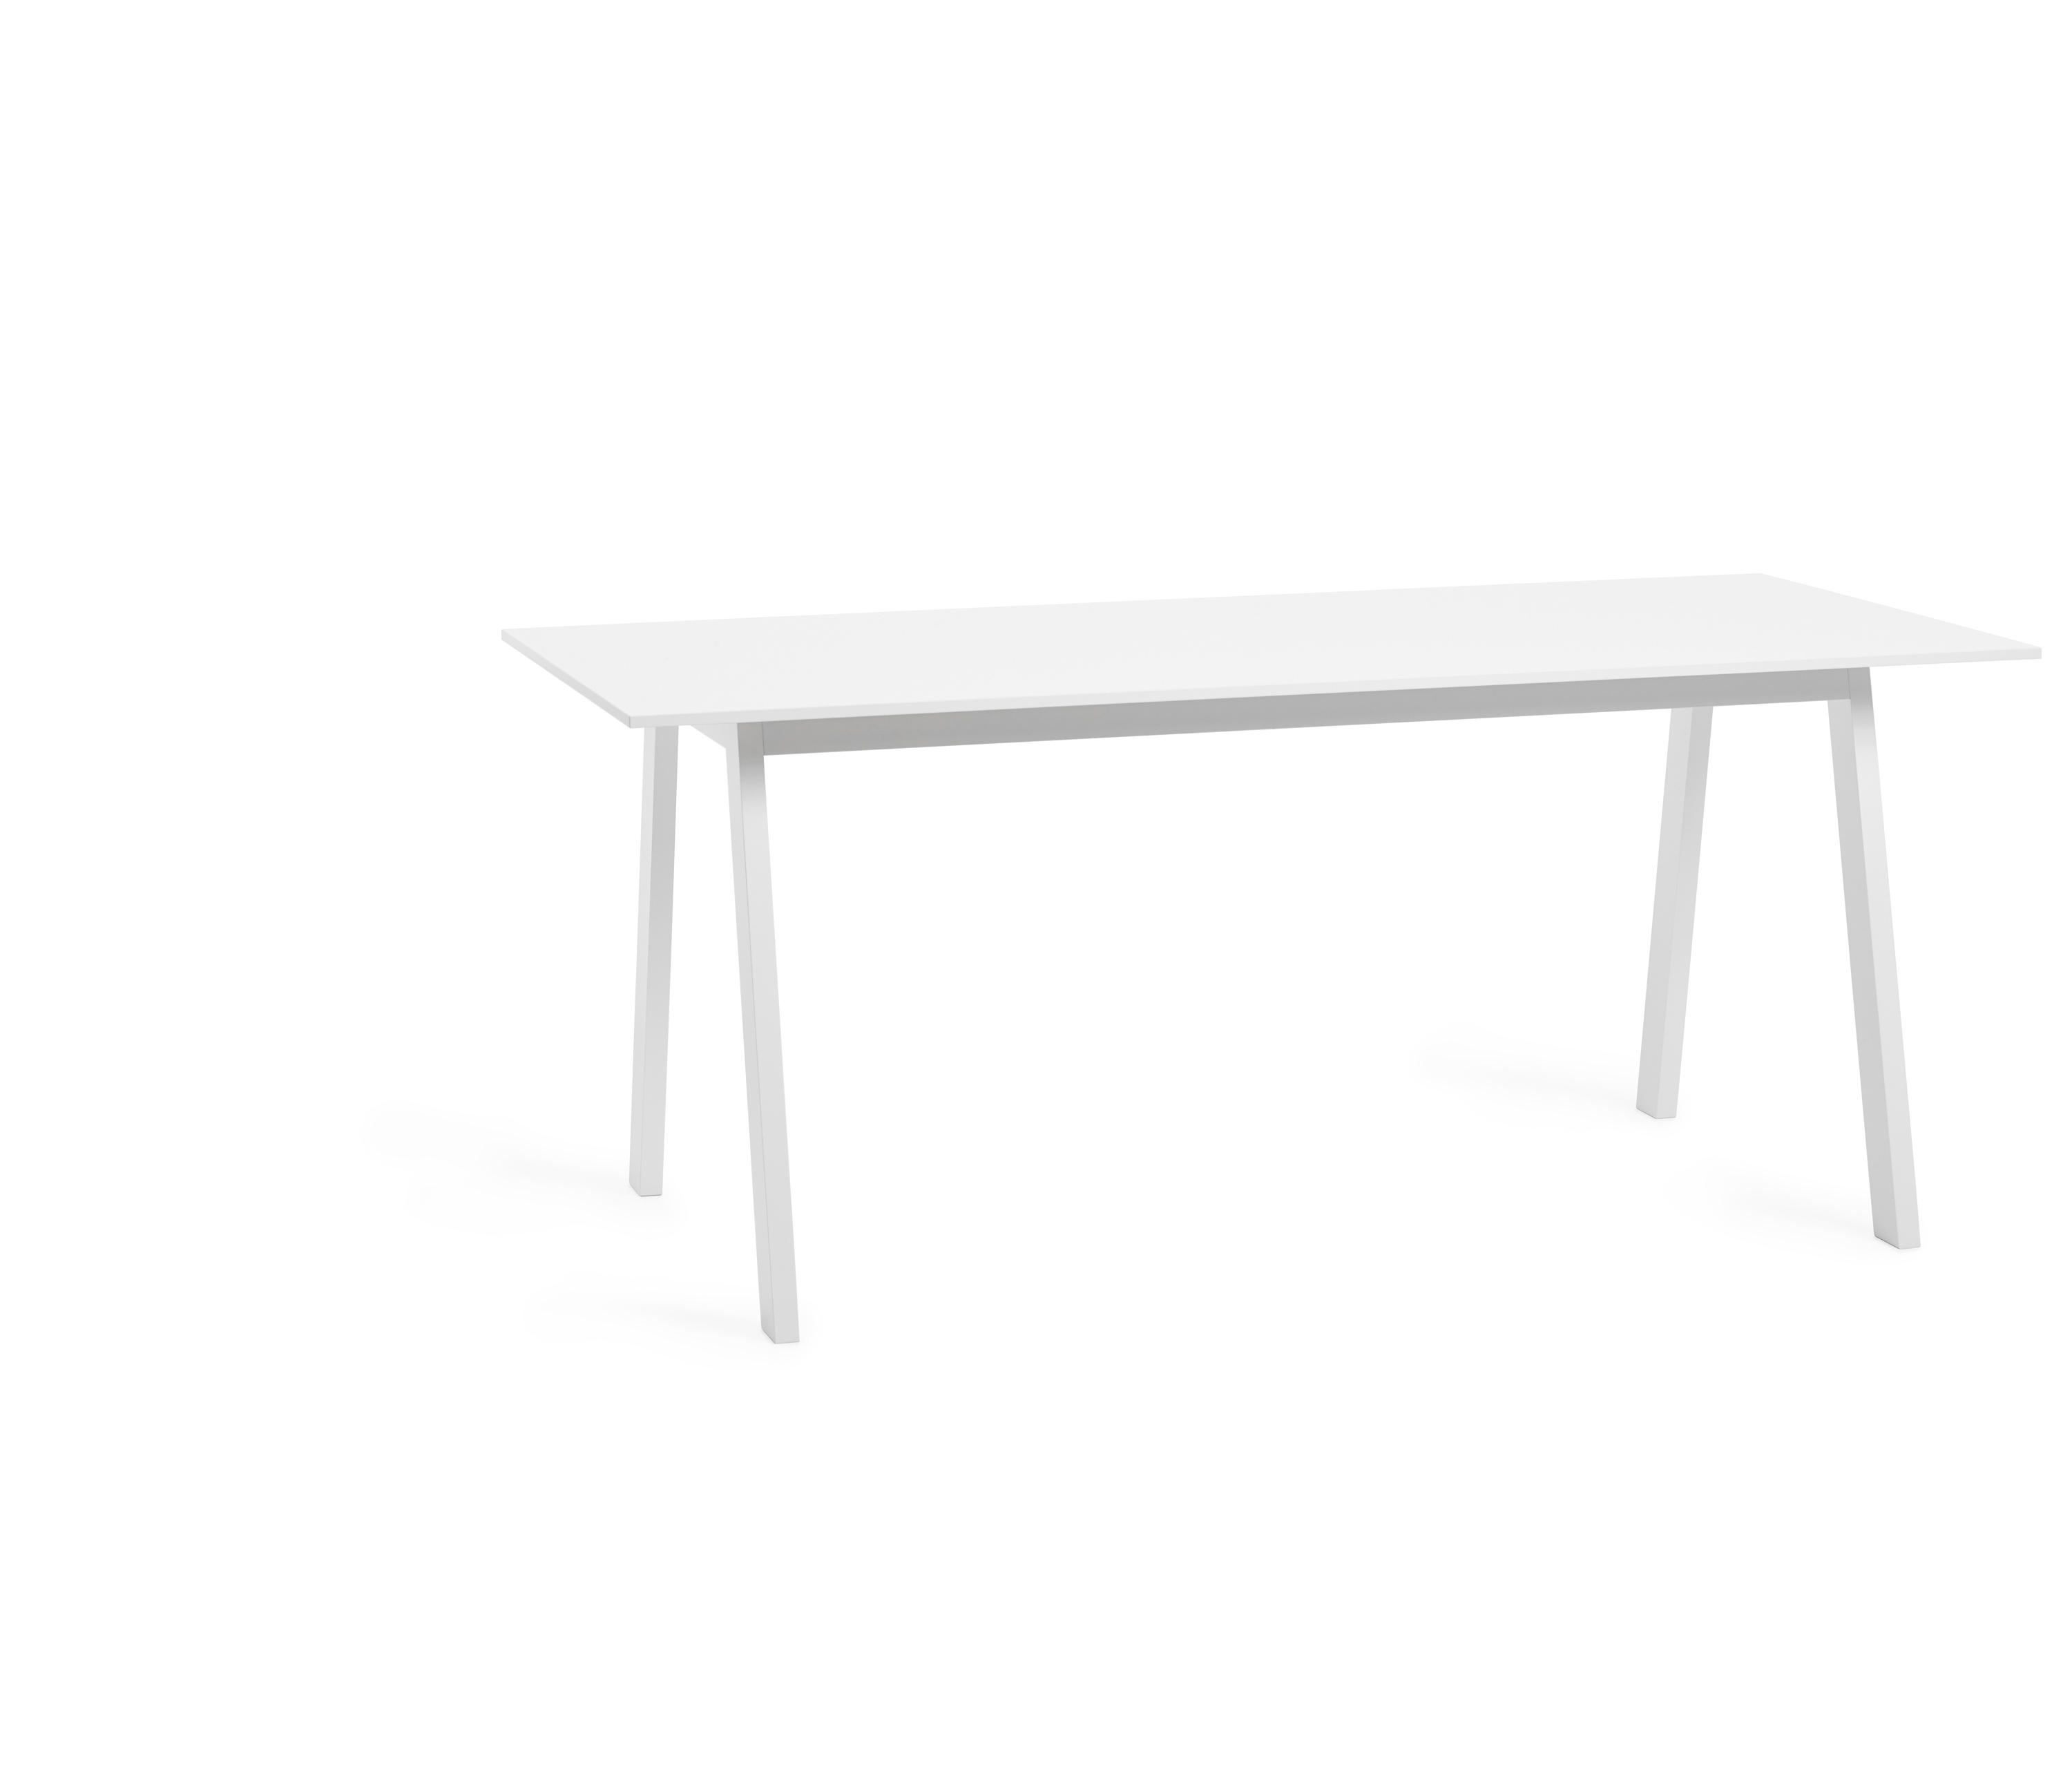 ANGLE TABLE - Dining tables from A2 designers AB | Architonic